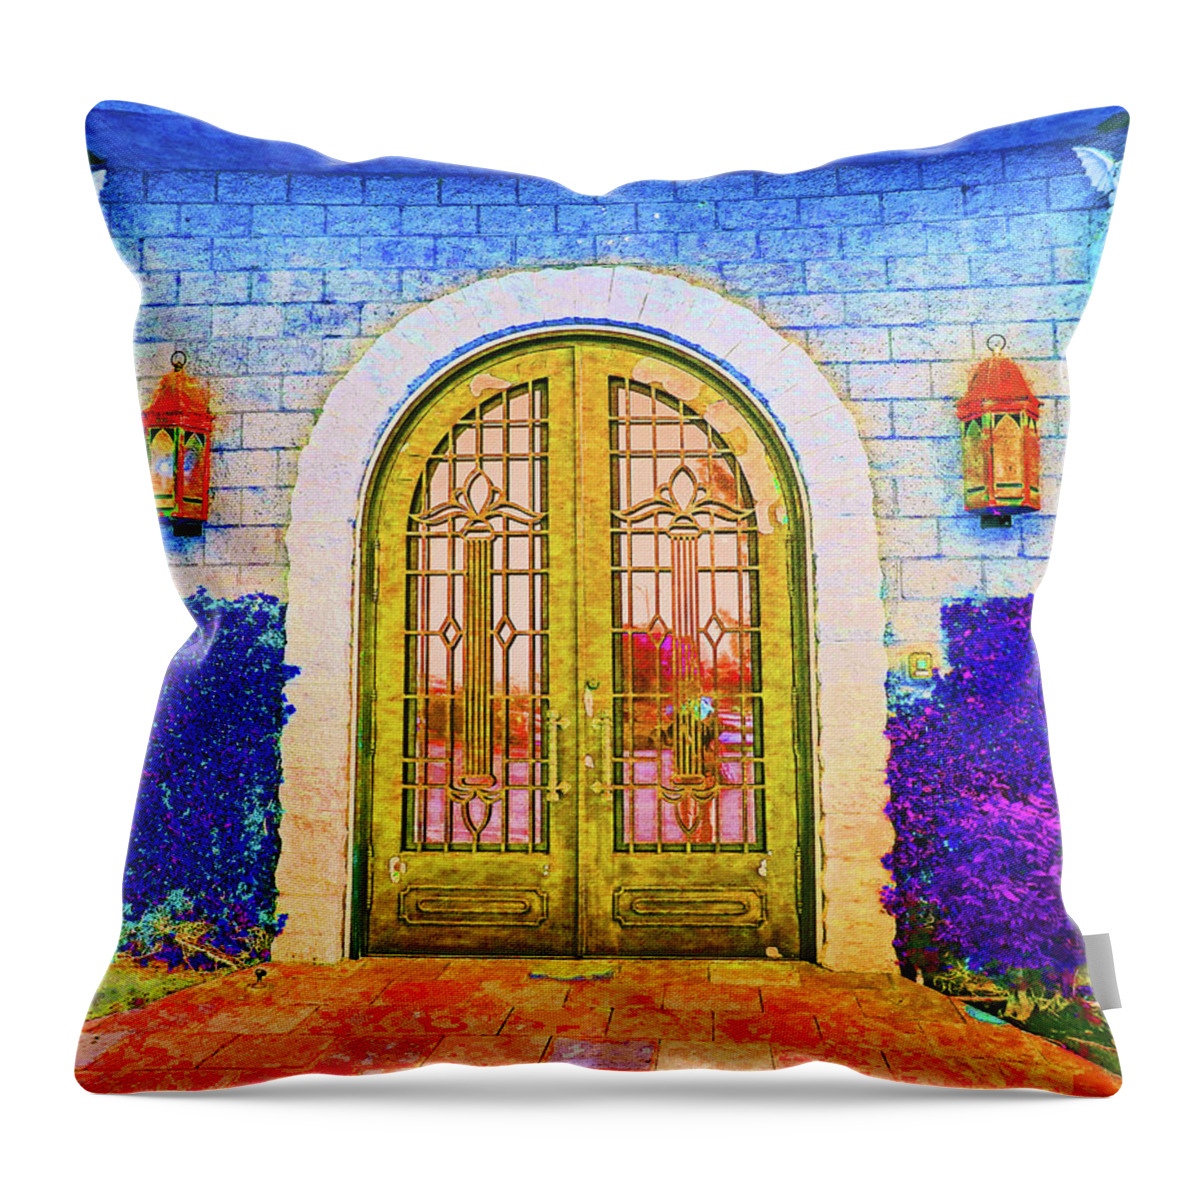 Castle Throw Pillow featuring the photograph Front Door To The Castle by Andrew Lawrence